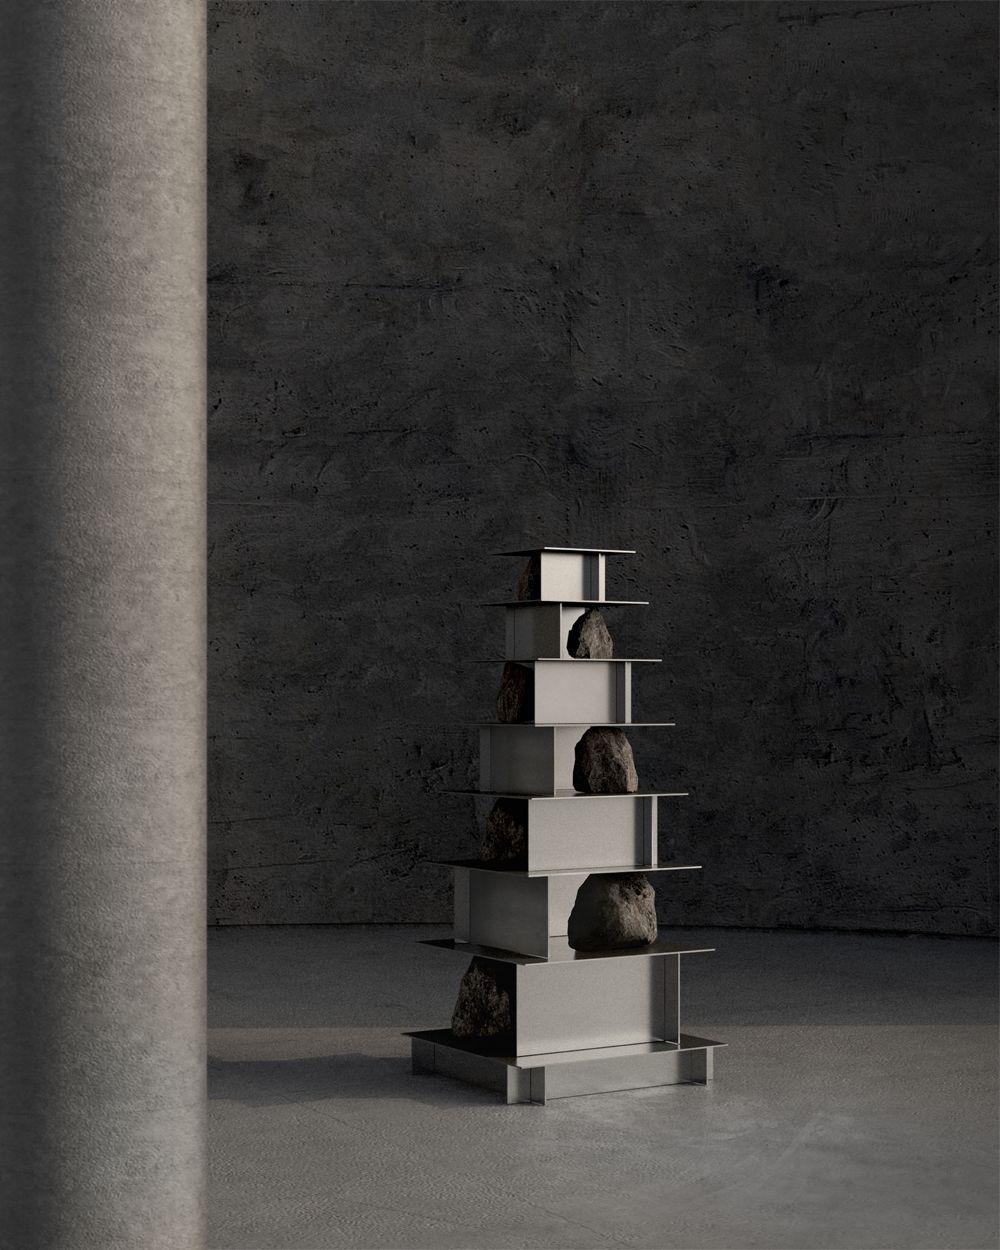 Proportions of stone shelf level 07 by Lee Sisan
Dimensions: W 76 x D 76 x H 160 cm
Materials: stainless steel, natural stone

Each piece is made to order and uses natural stones, so please expect some variability in design.

Is constructed by